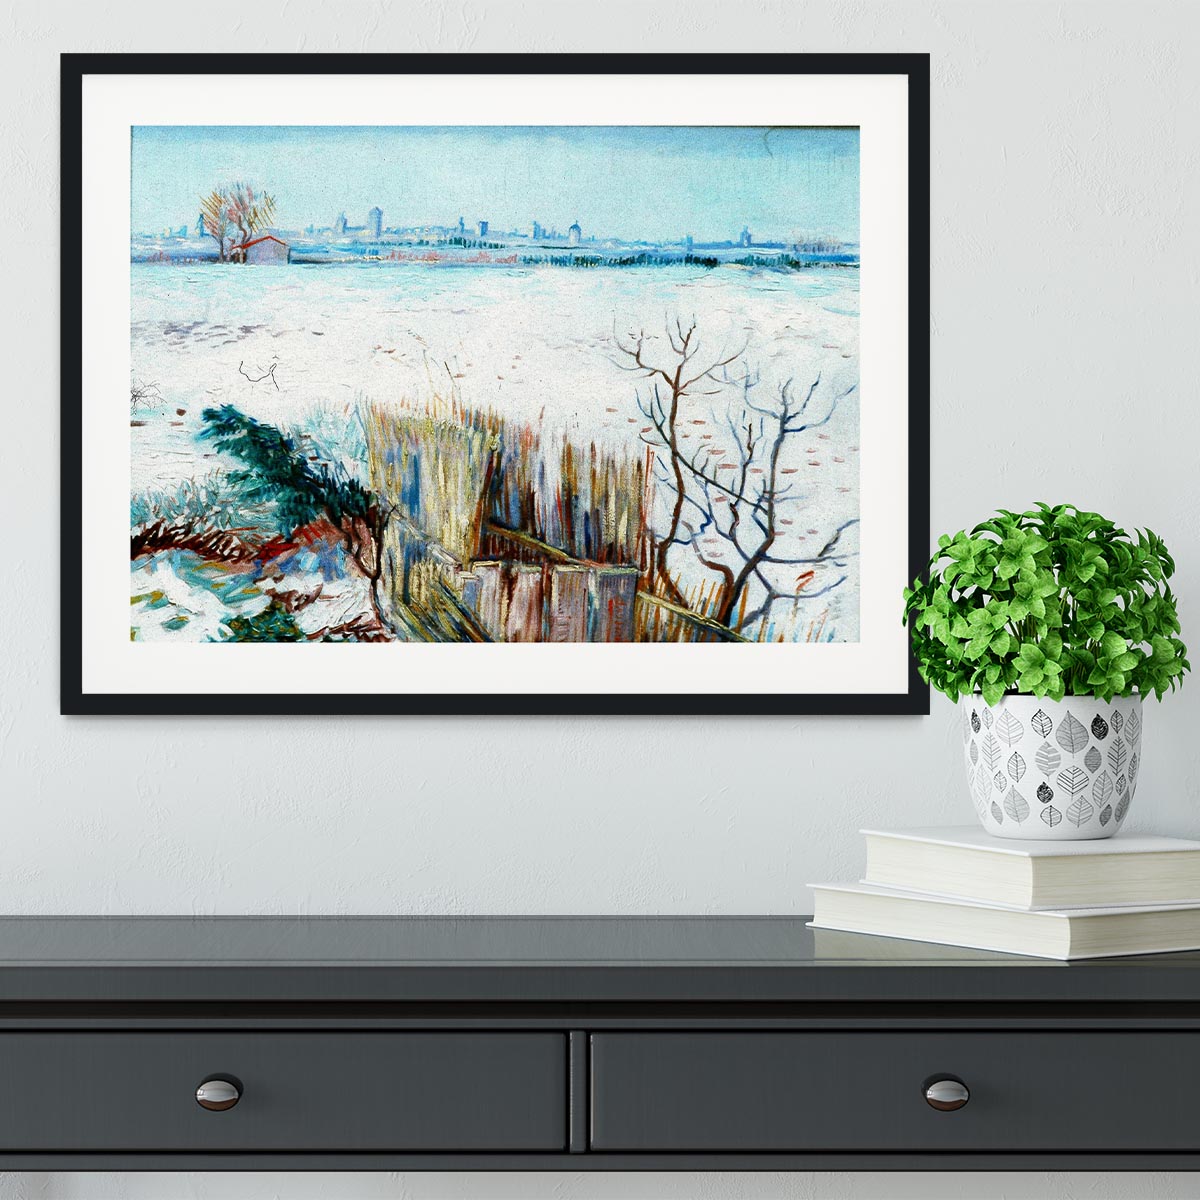 Snowy Landscape with Arles in the Background by Van Gogh Framed Print - Canvas Art Rocks - 1